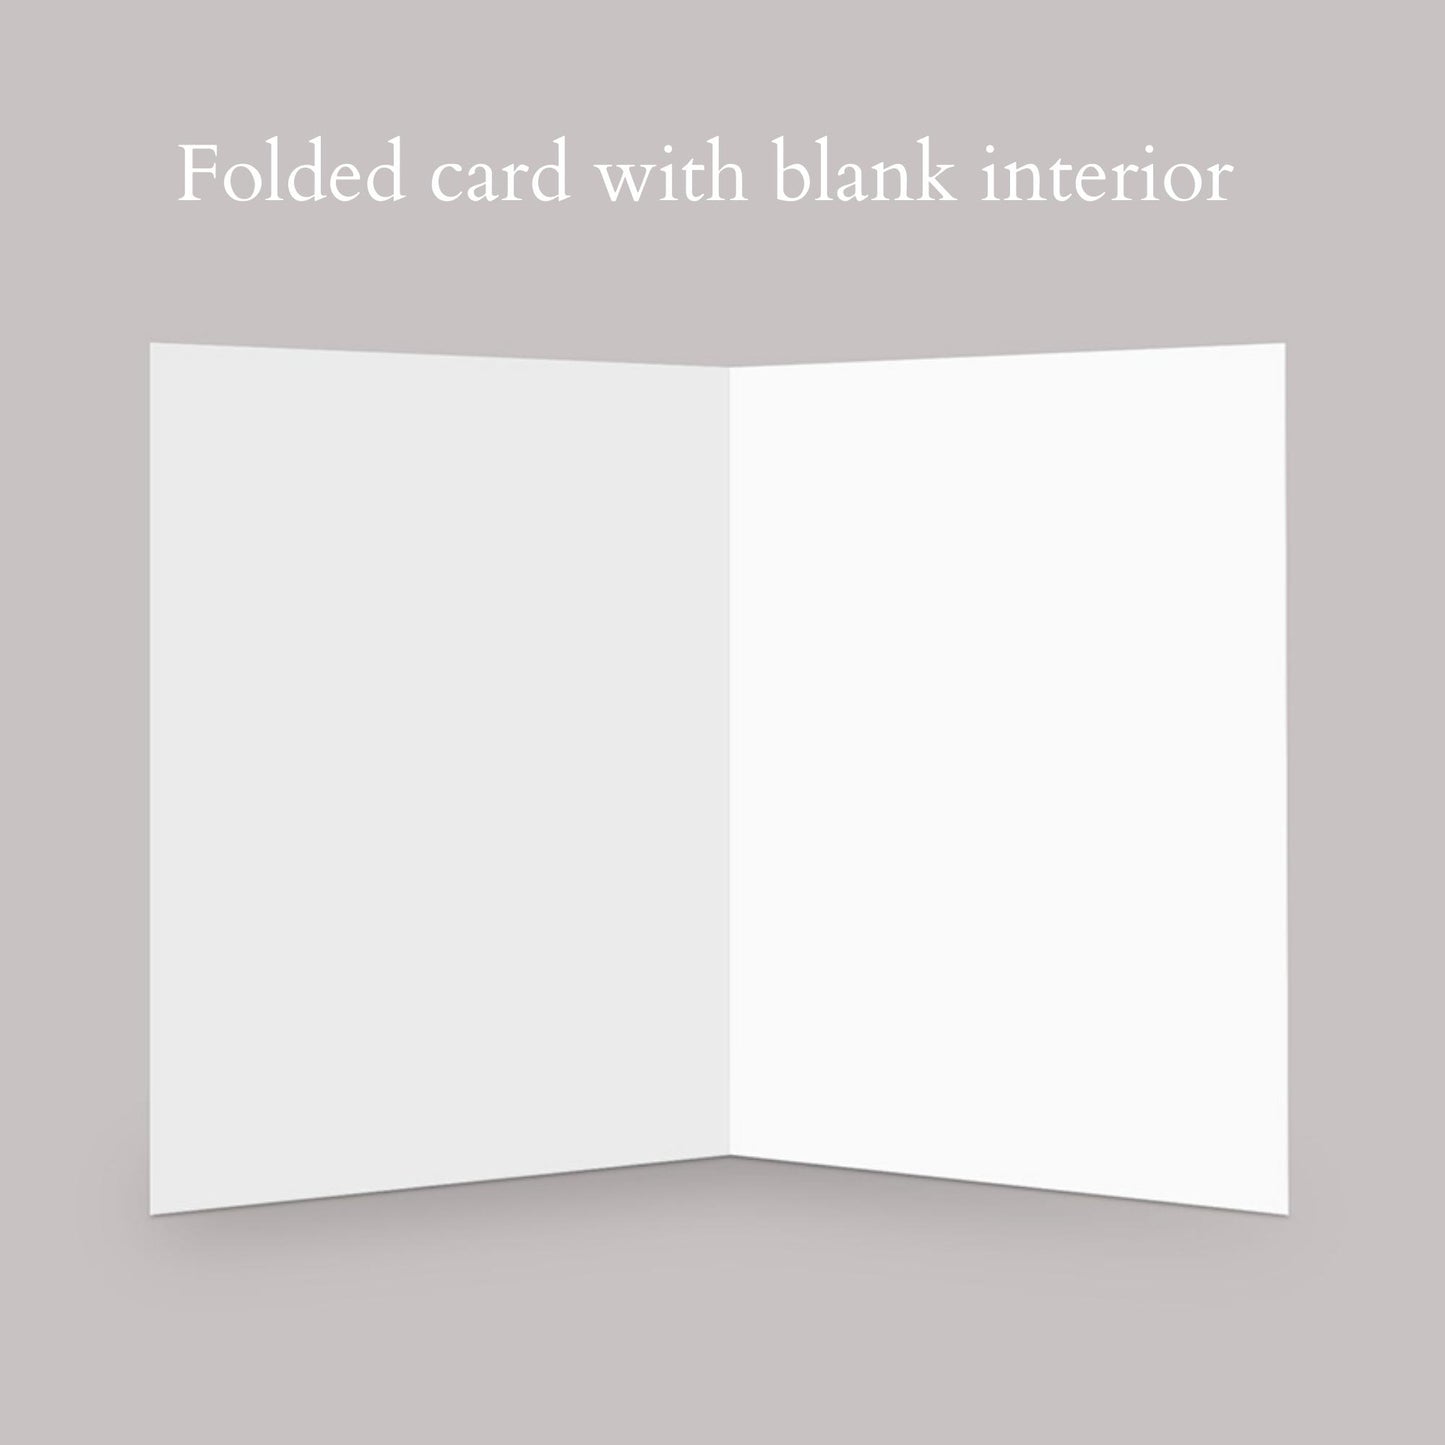 all greeting cards have a blank interior